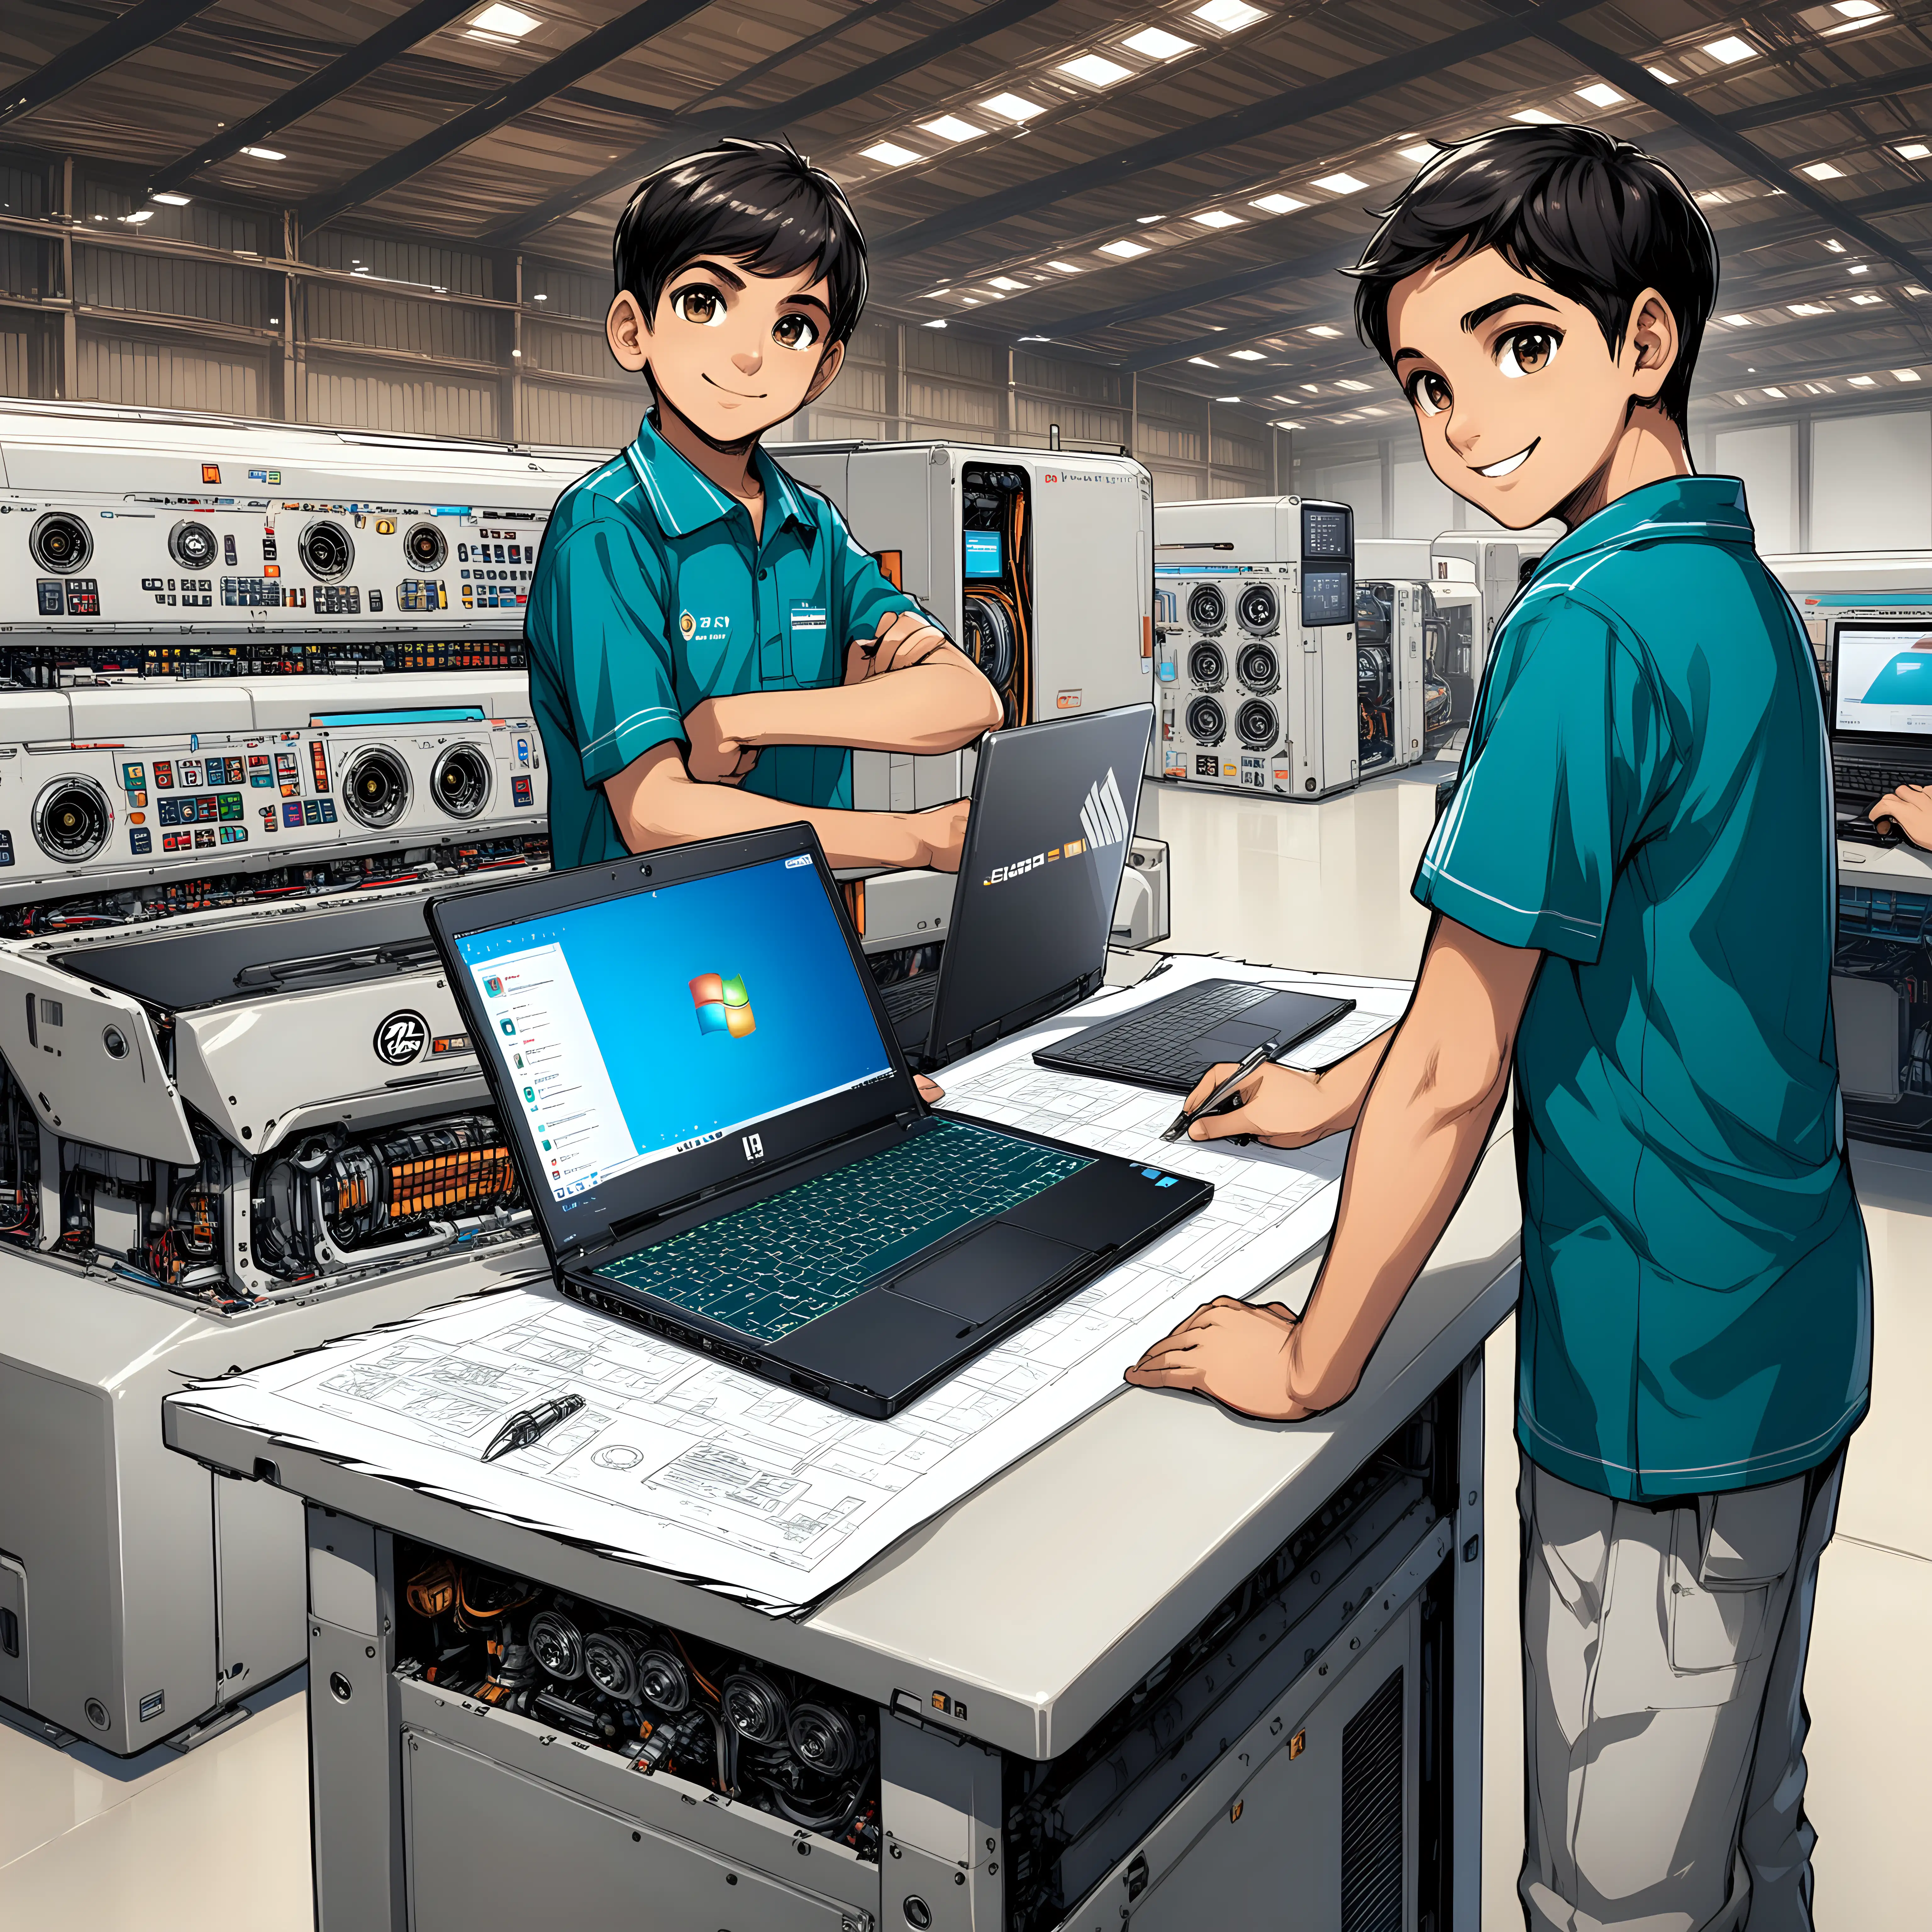 Persian Boys Designing and Installing HighTech Engines in 2124